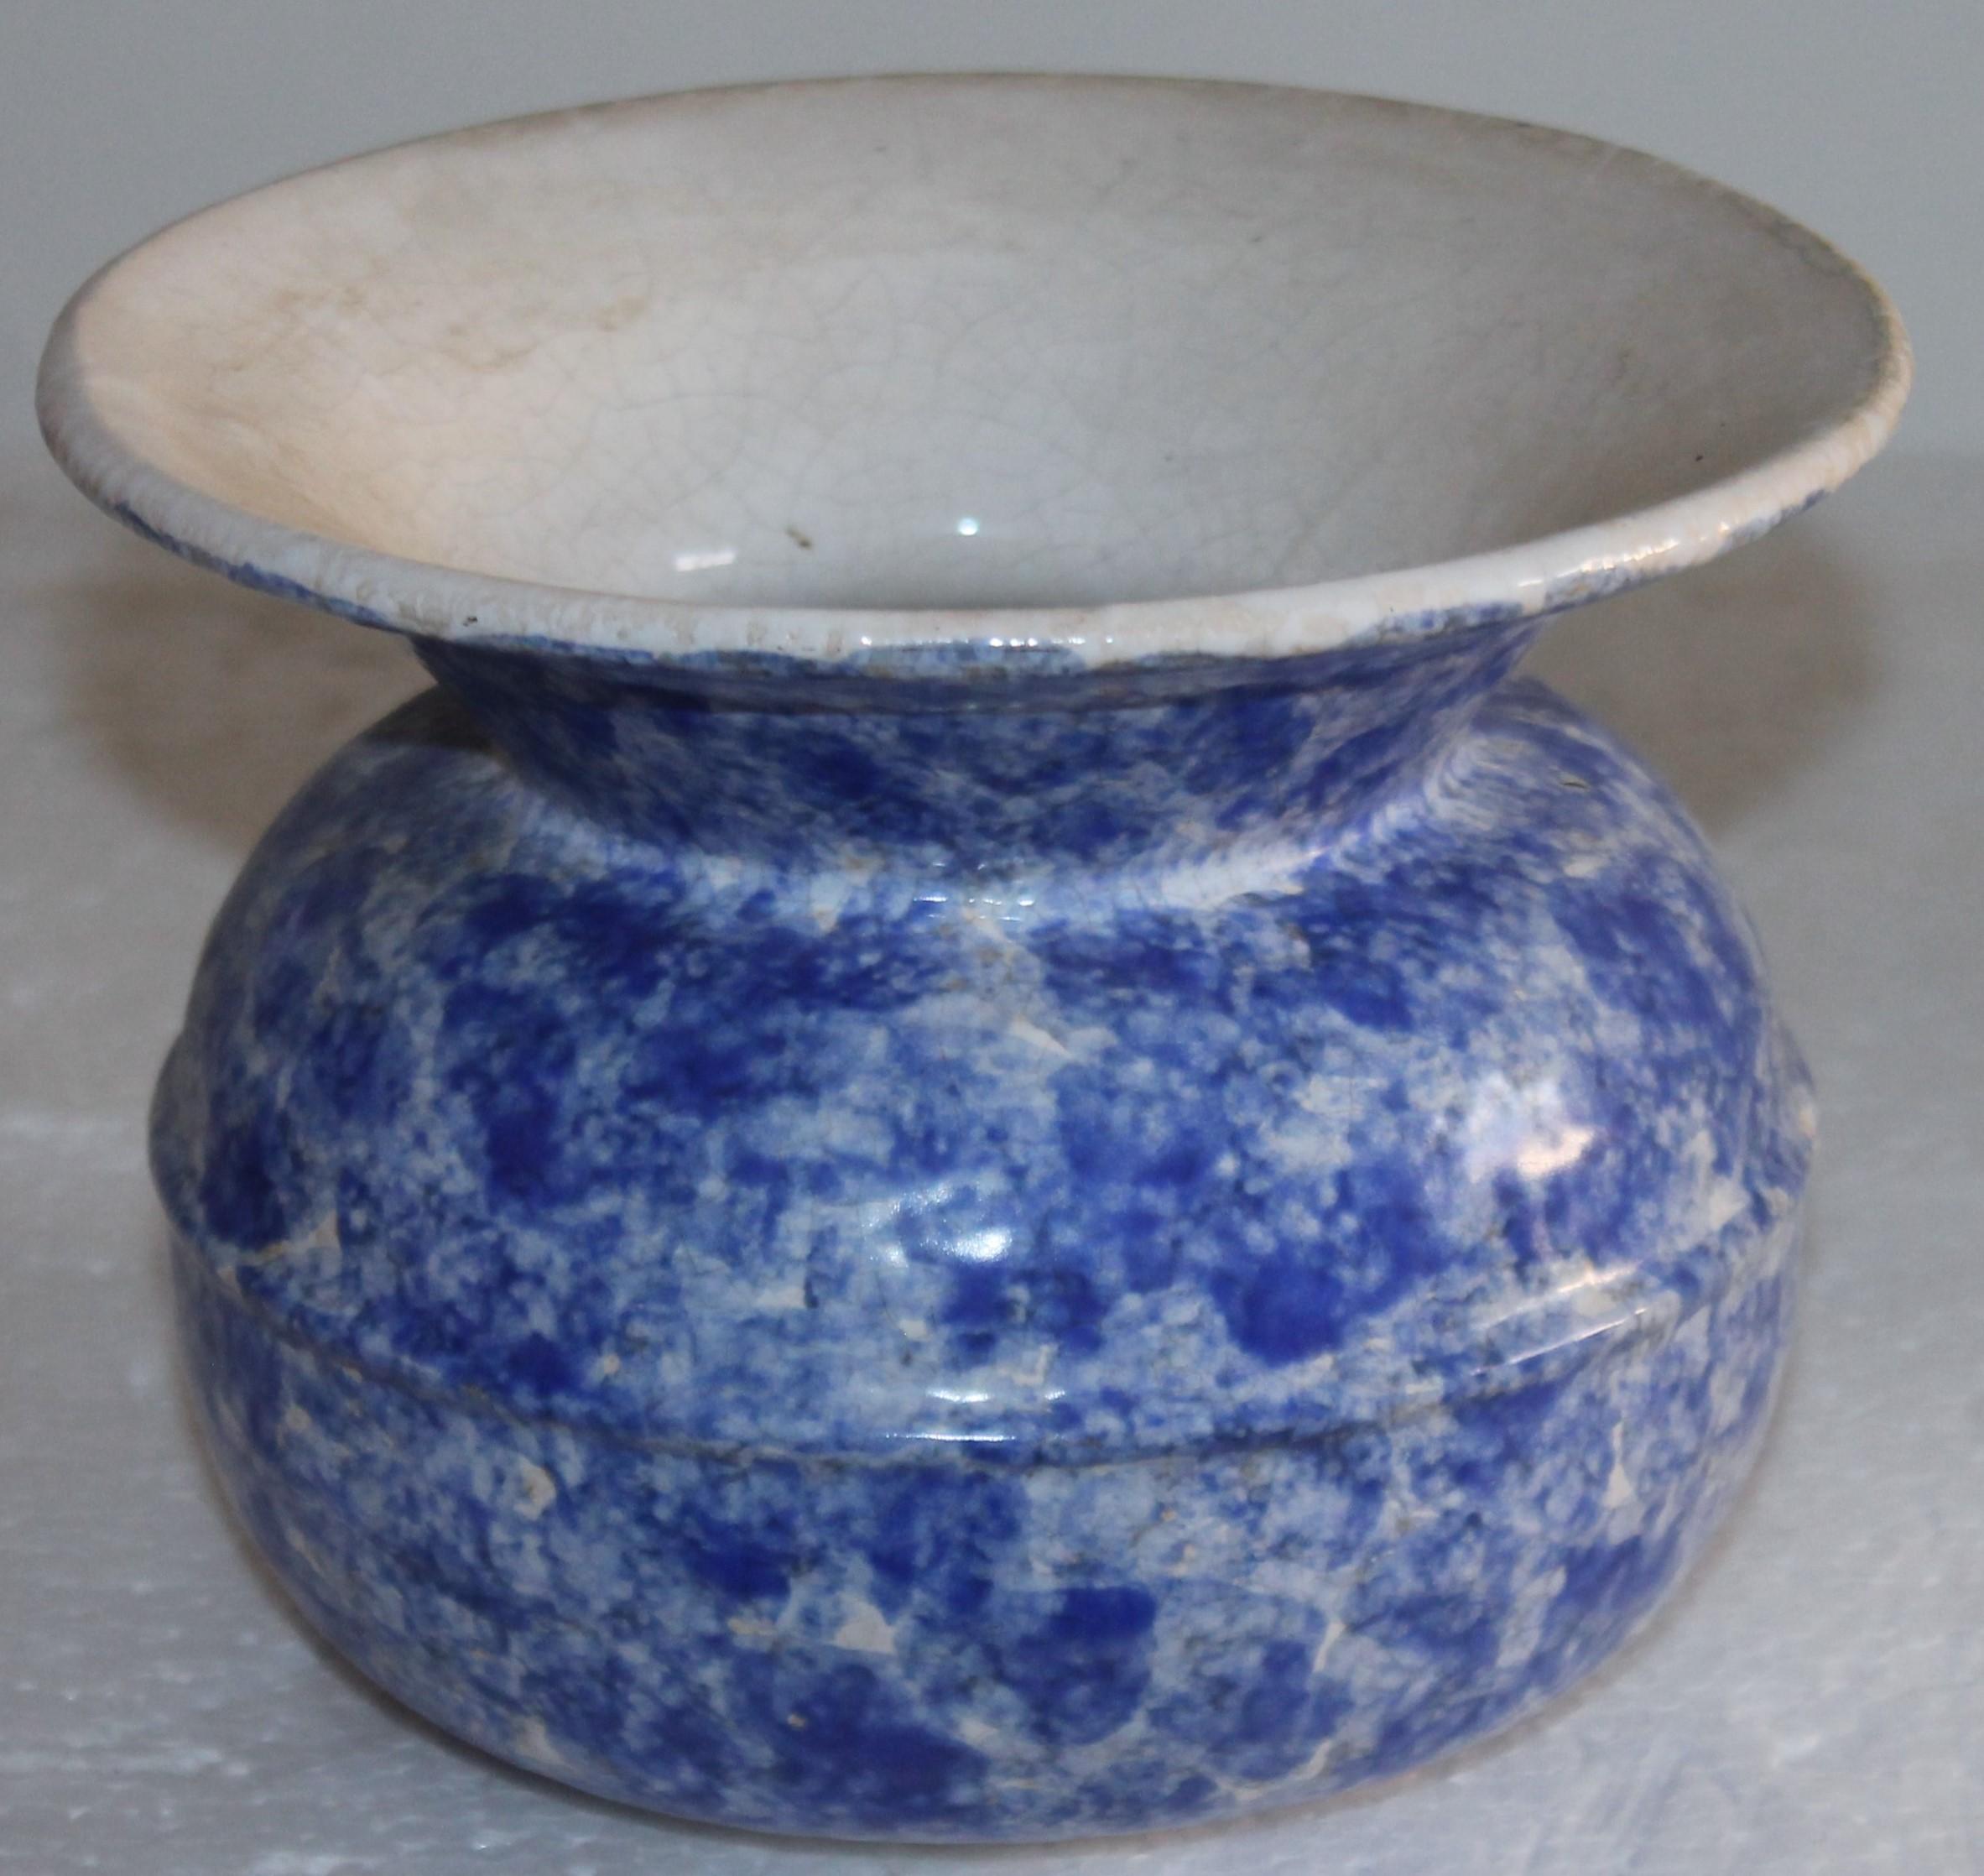 This most unusual sponge ware spittoon has such a unusual shape and form. Very early form.